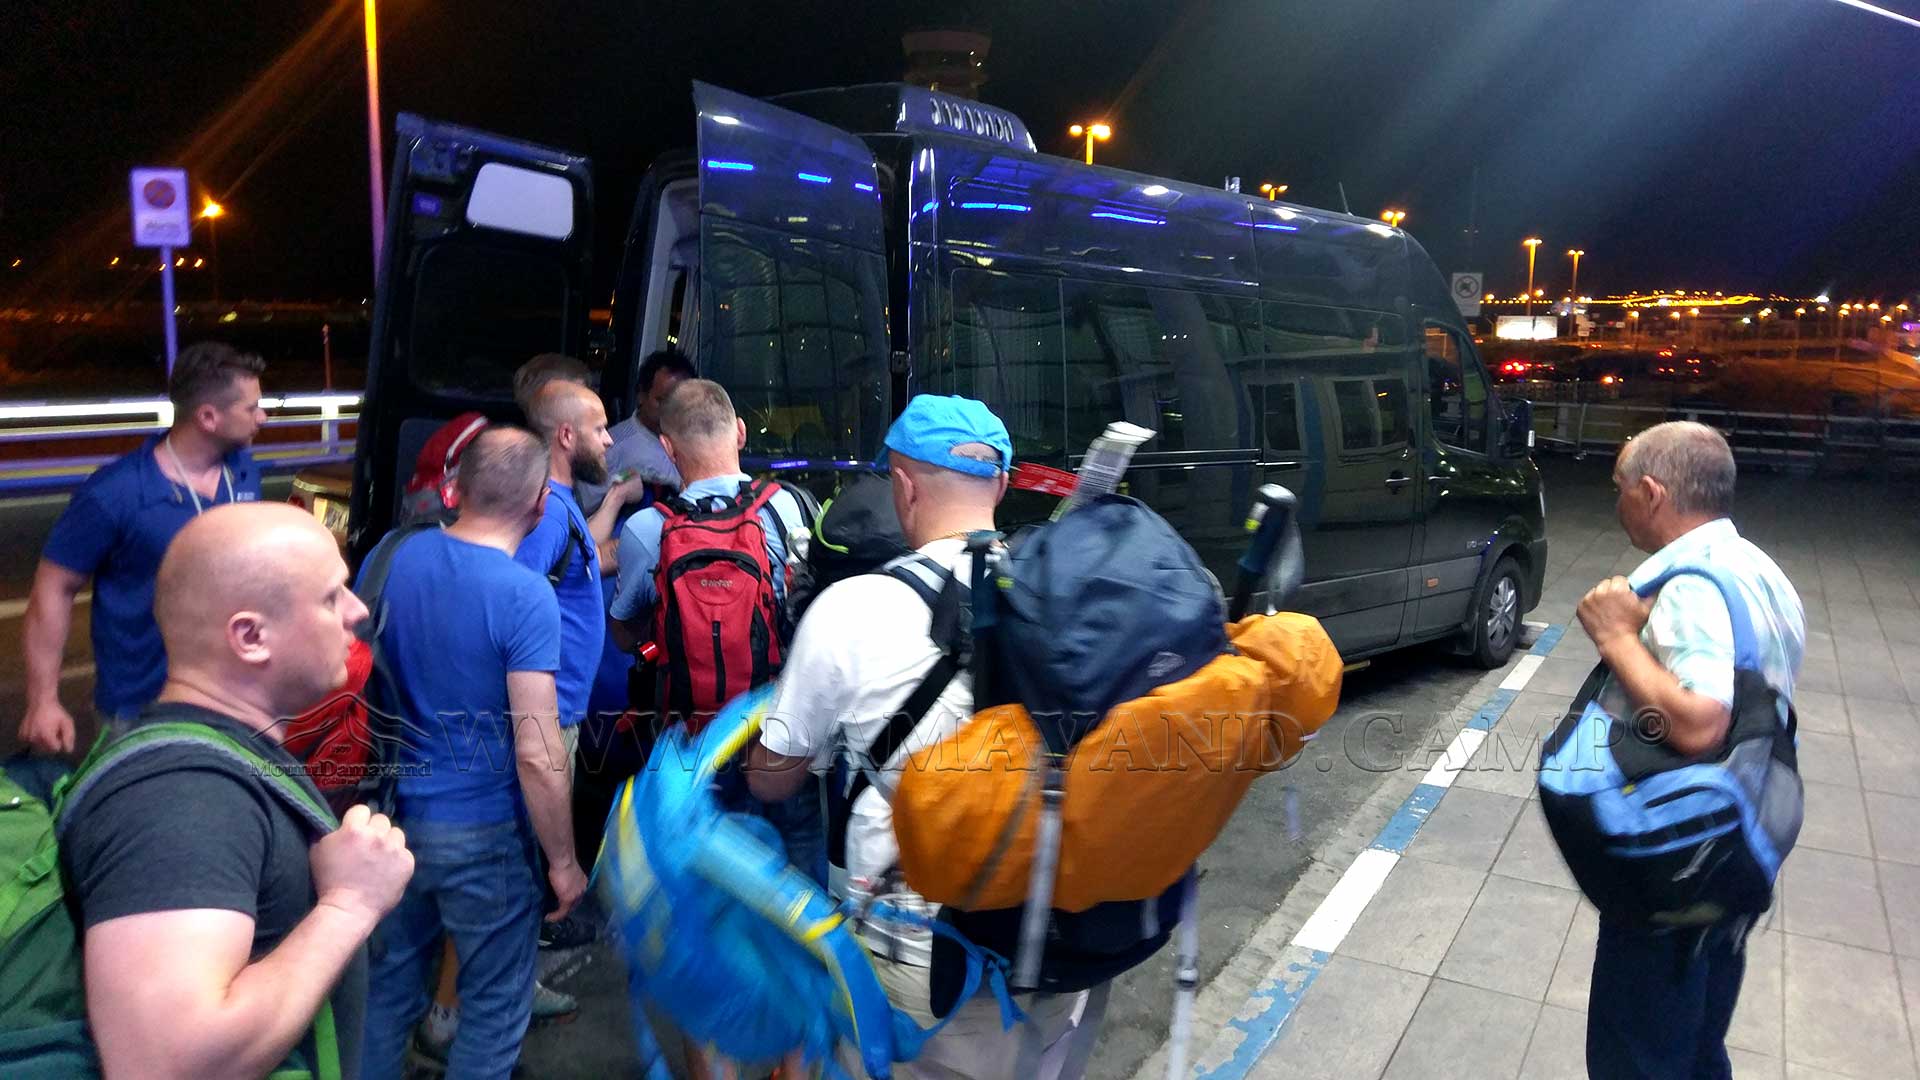 Our transport service, ready at midnight at IKA airport, for the dedicated transfer of climbers to Camp 1 of Damavand.